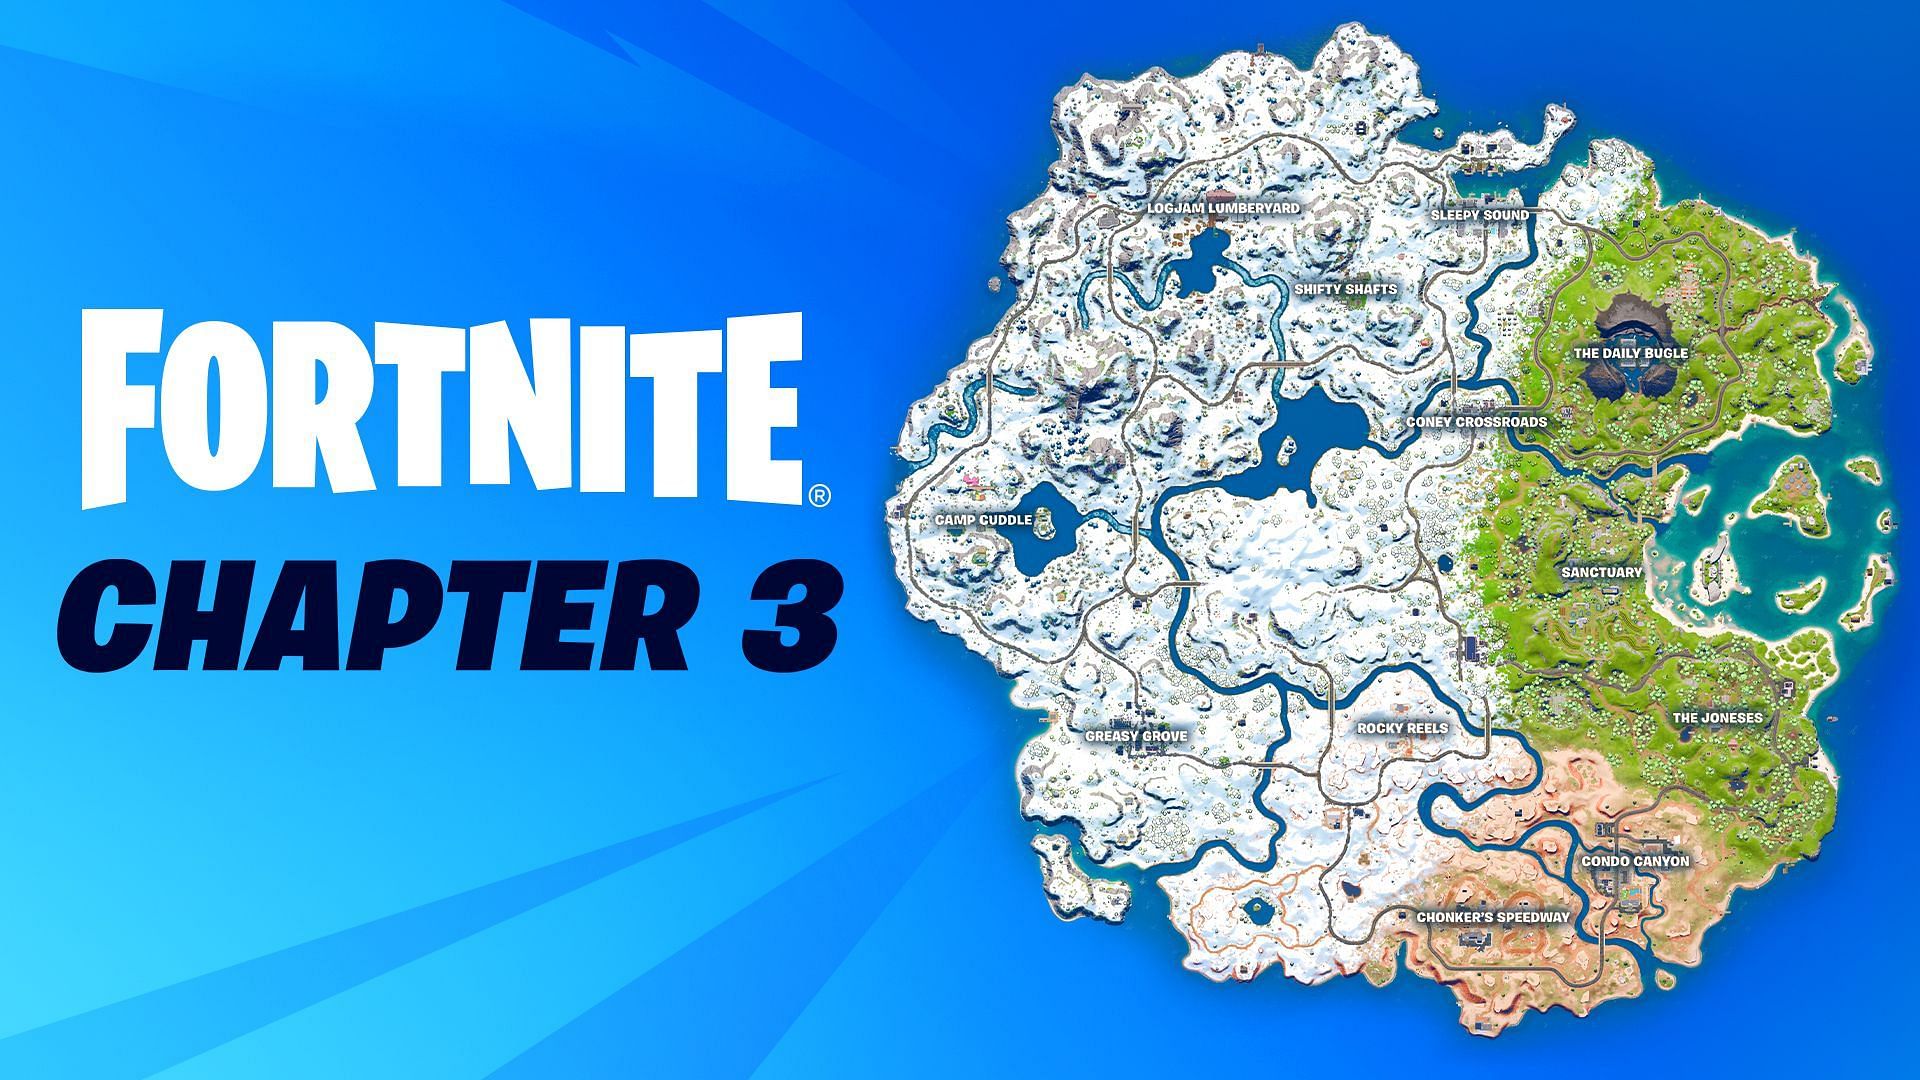 Chapters 1, 2 and 3 were combined for a concept (Image via Epic Games)